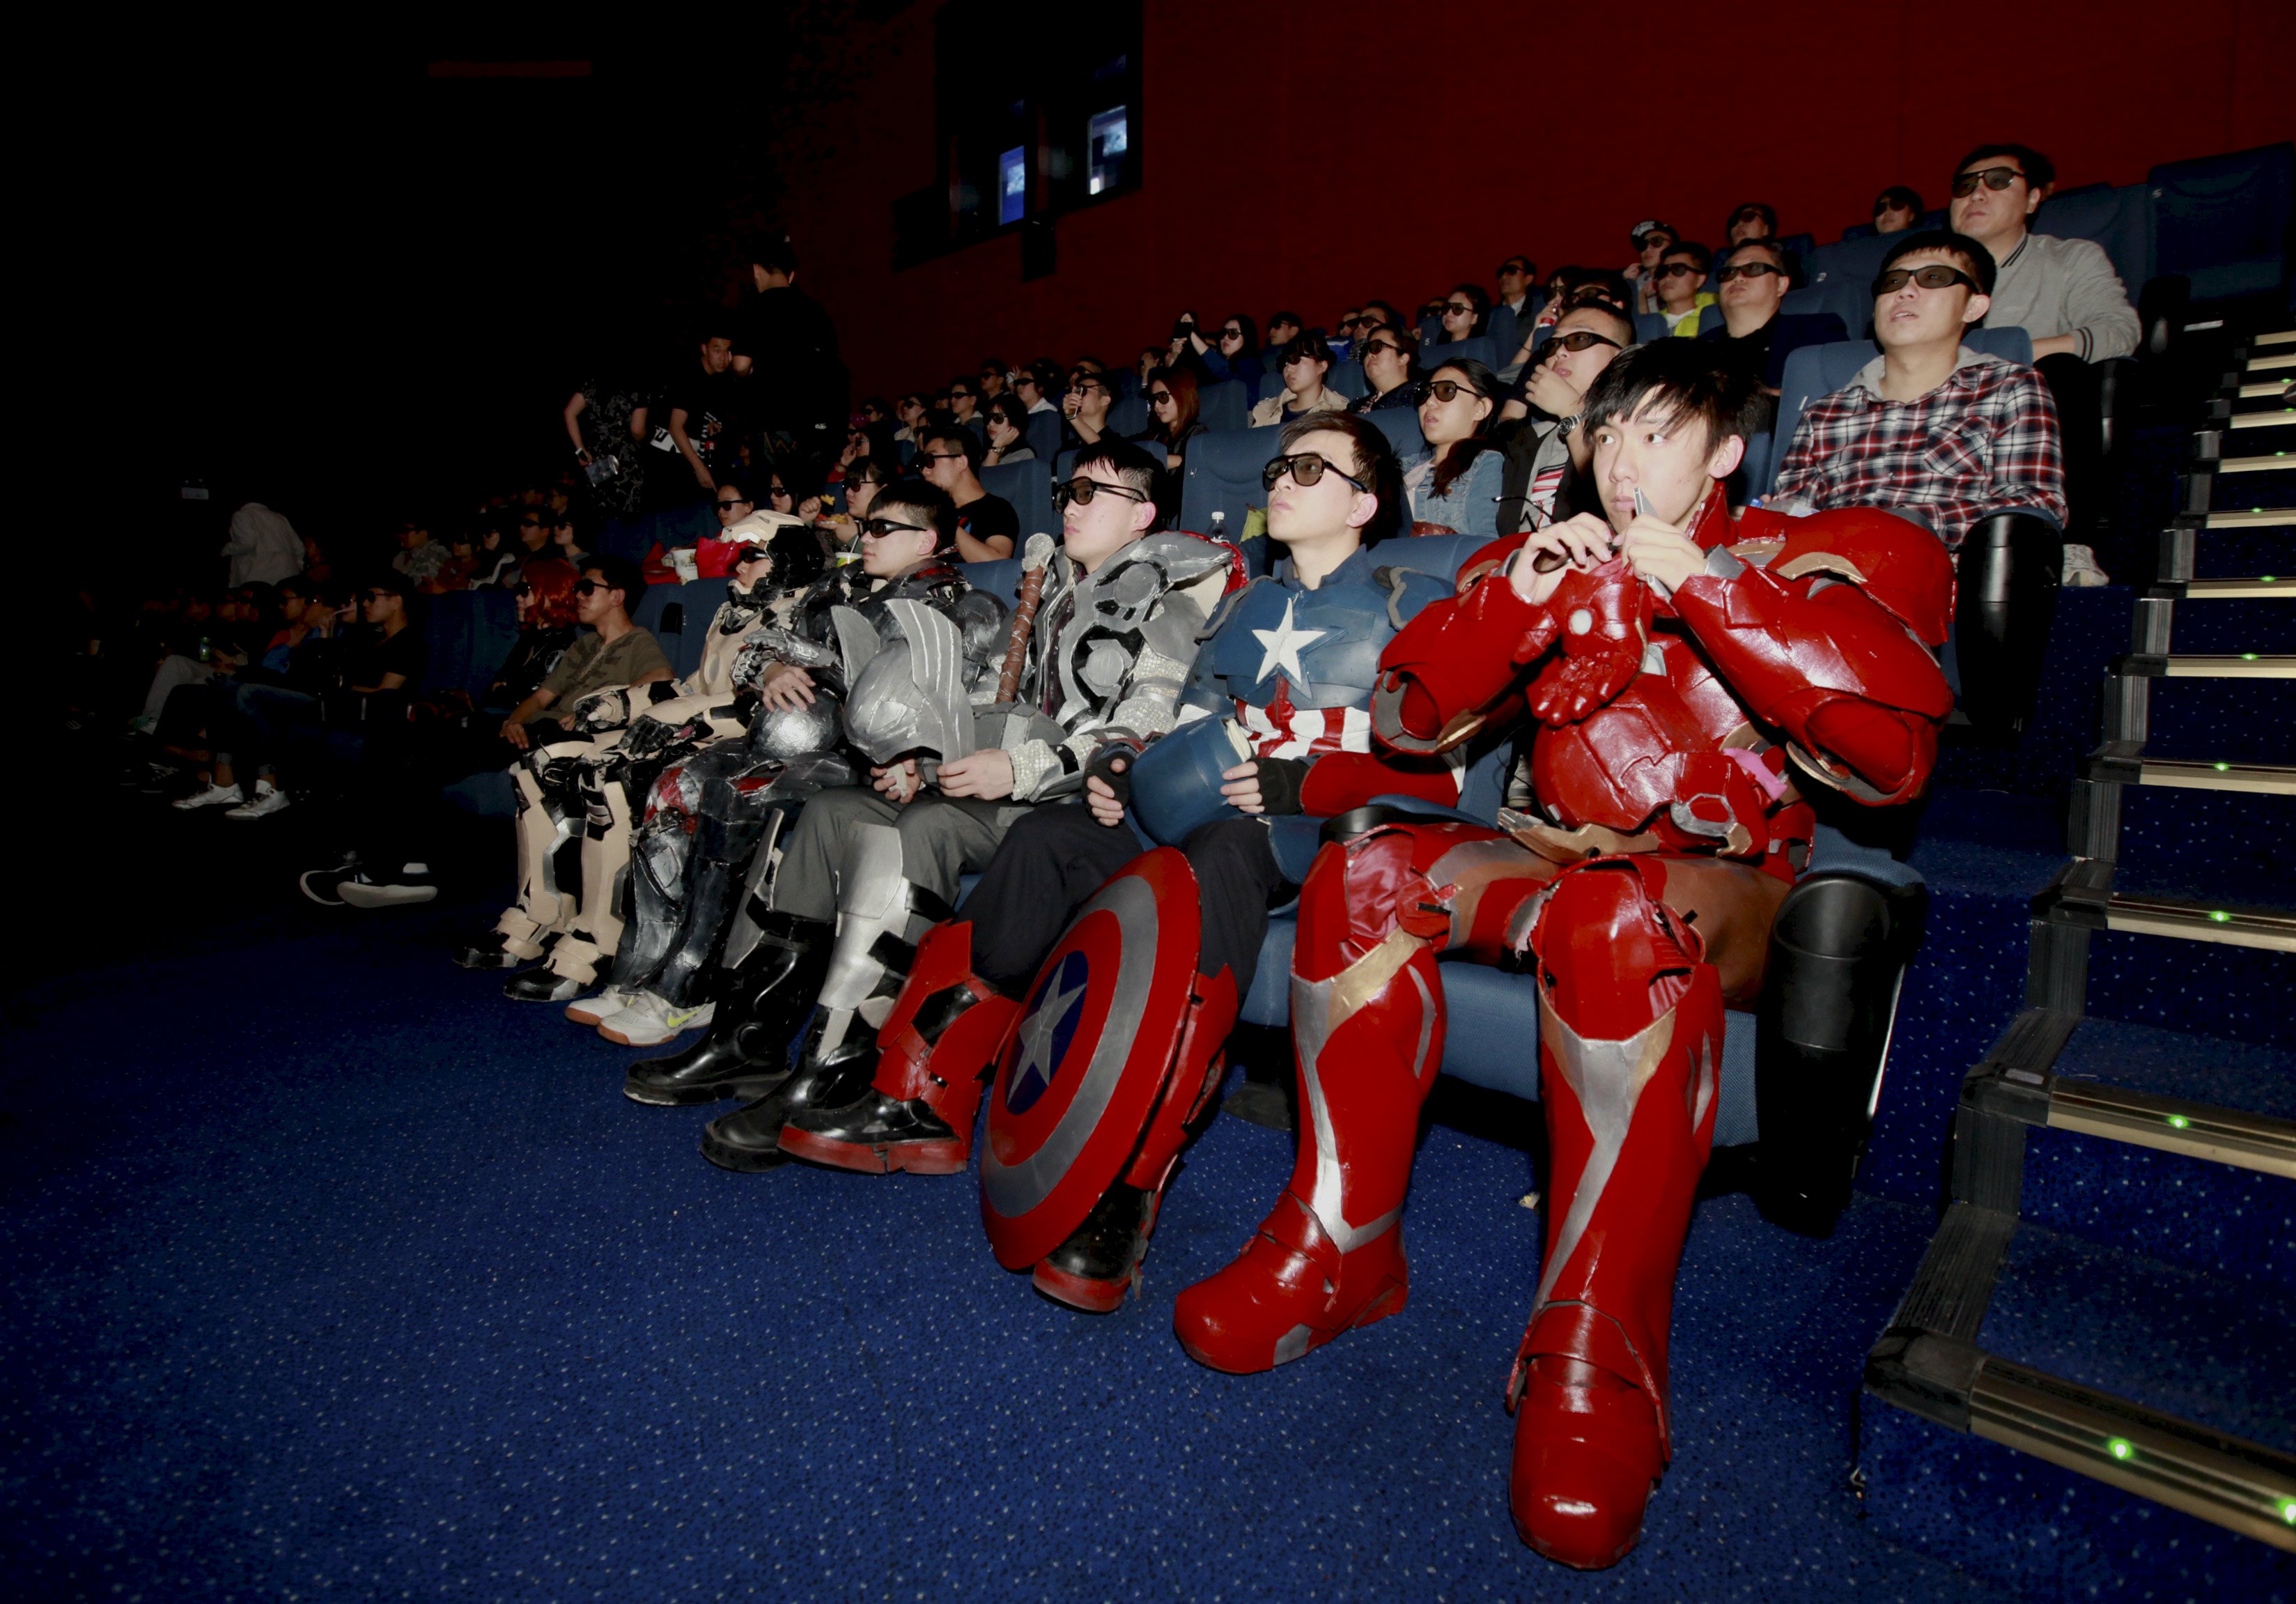 A group of fans dressed in homemade replica armours of "Avengers: Age of Ultron" movie characters, Iron Man, Captain America and Thor, watch the film in a theatre in Changchun, Jilin province, China, May 16, 2015. The group, led by college student Zu Bingqun, spent about 70,000 yuan to make the replica armours for all the main characters in the movie, local media reported. Picture taken May 16, 2015. REUTERS/Stringer ATTENTION EDITORS - CHINA OUT. NO COMMERCIAL OR EDITORIAL SALES IN CHINA